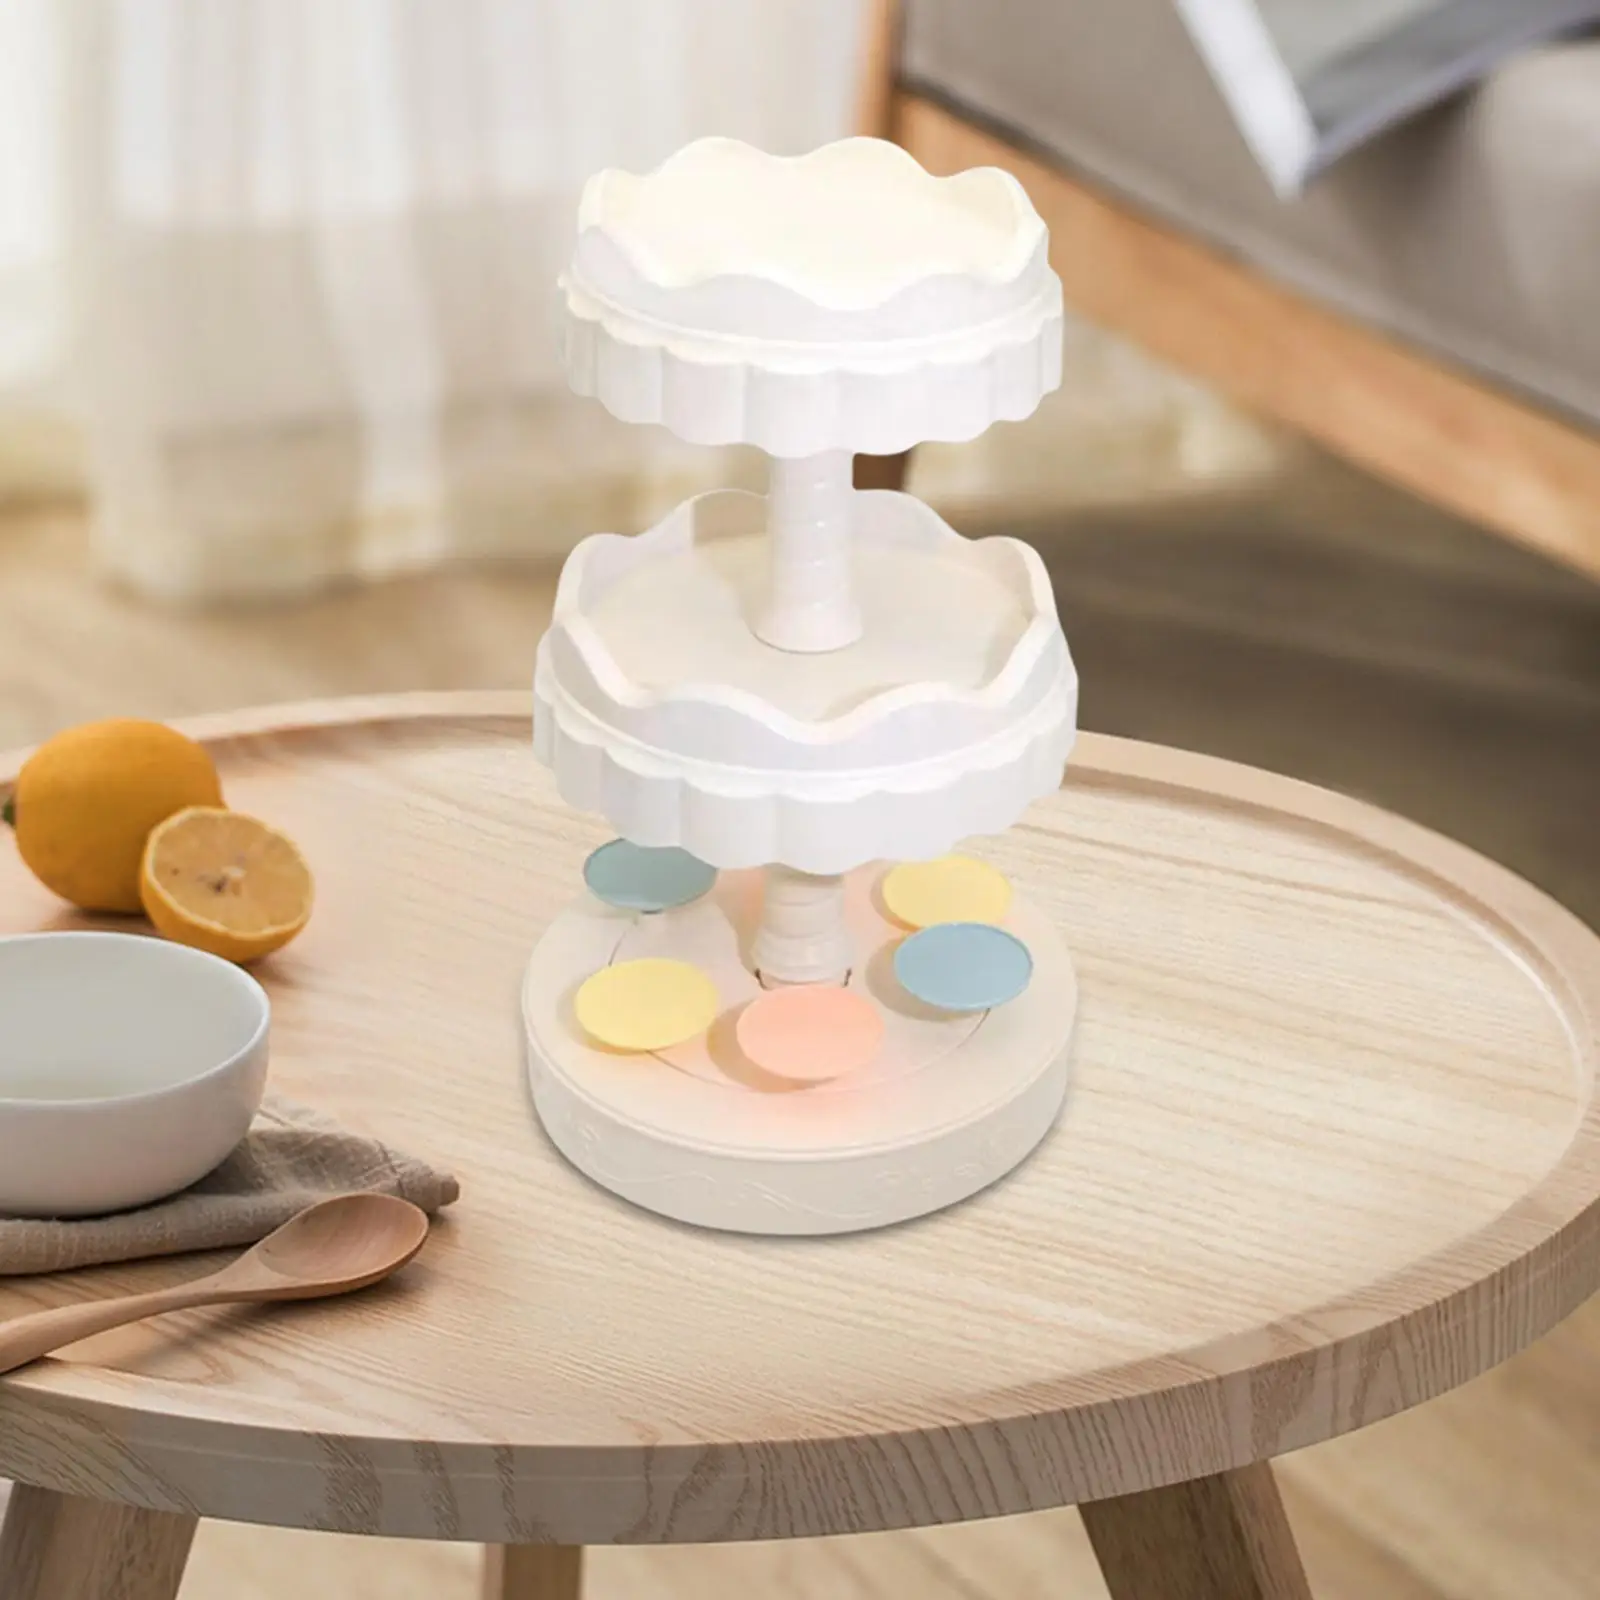 Rotating Dessert Machine Sushi Tray with Music Display Holder Pastries Dessert Cookie Dessert Turntable for Party